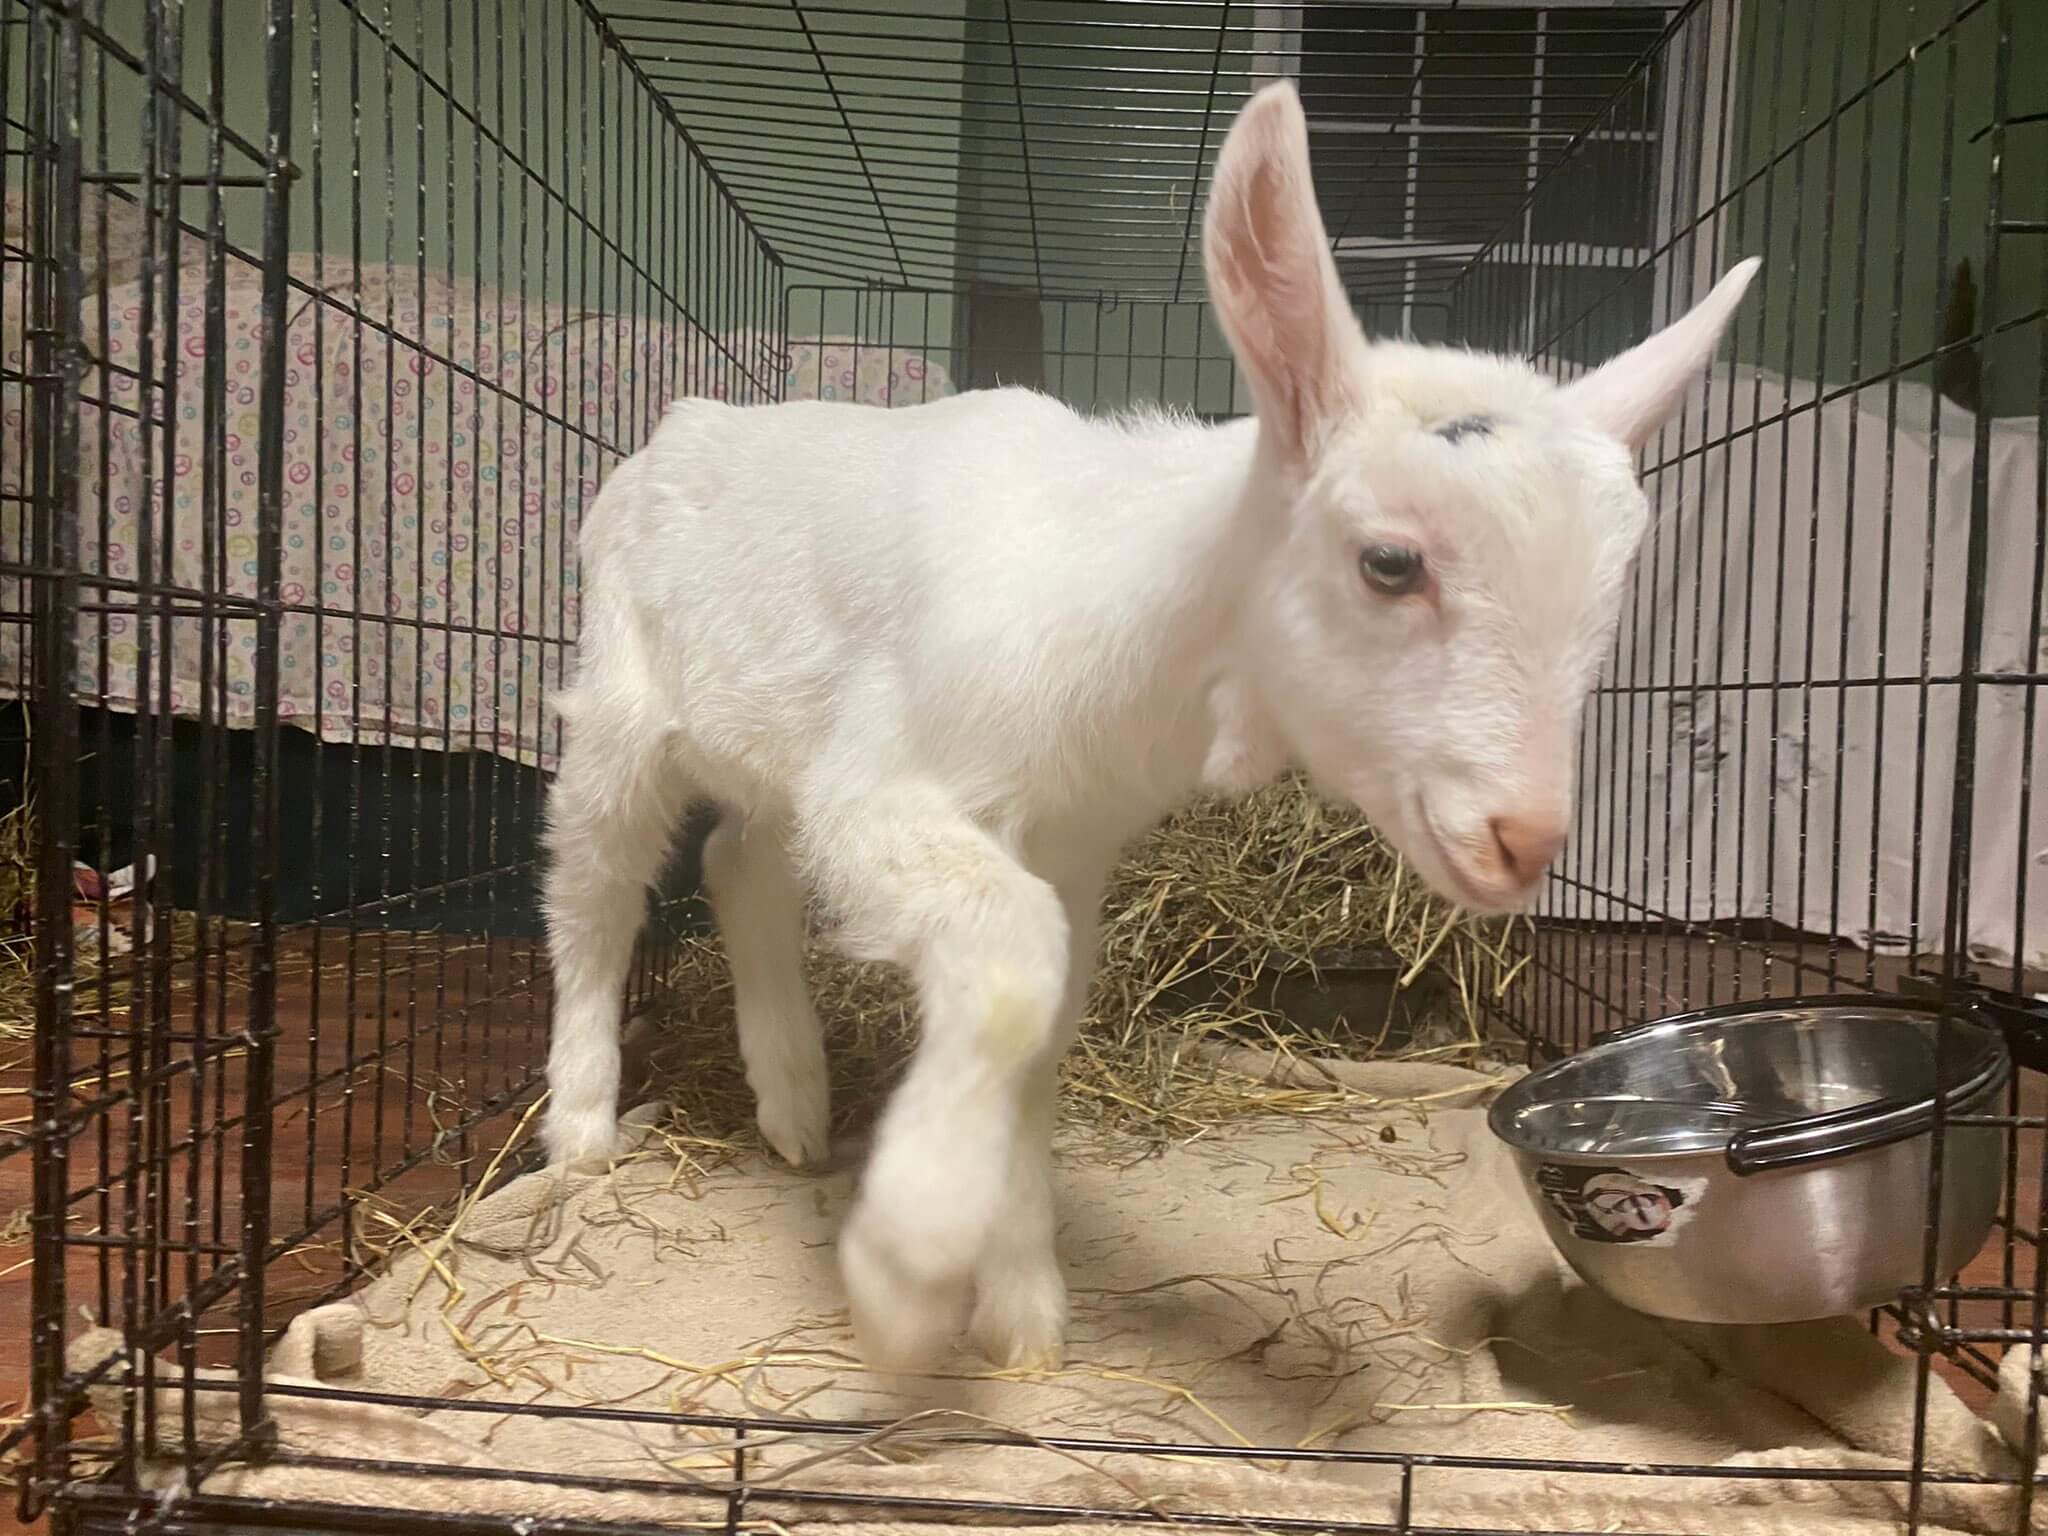 Good Samaritan brings goat found on side of Queens highway to police ...